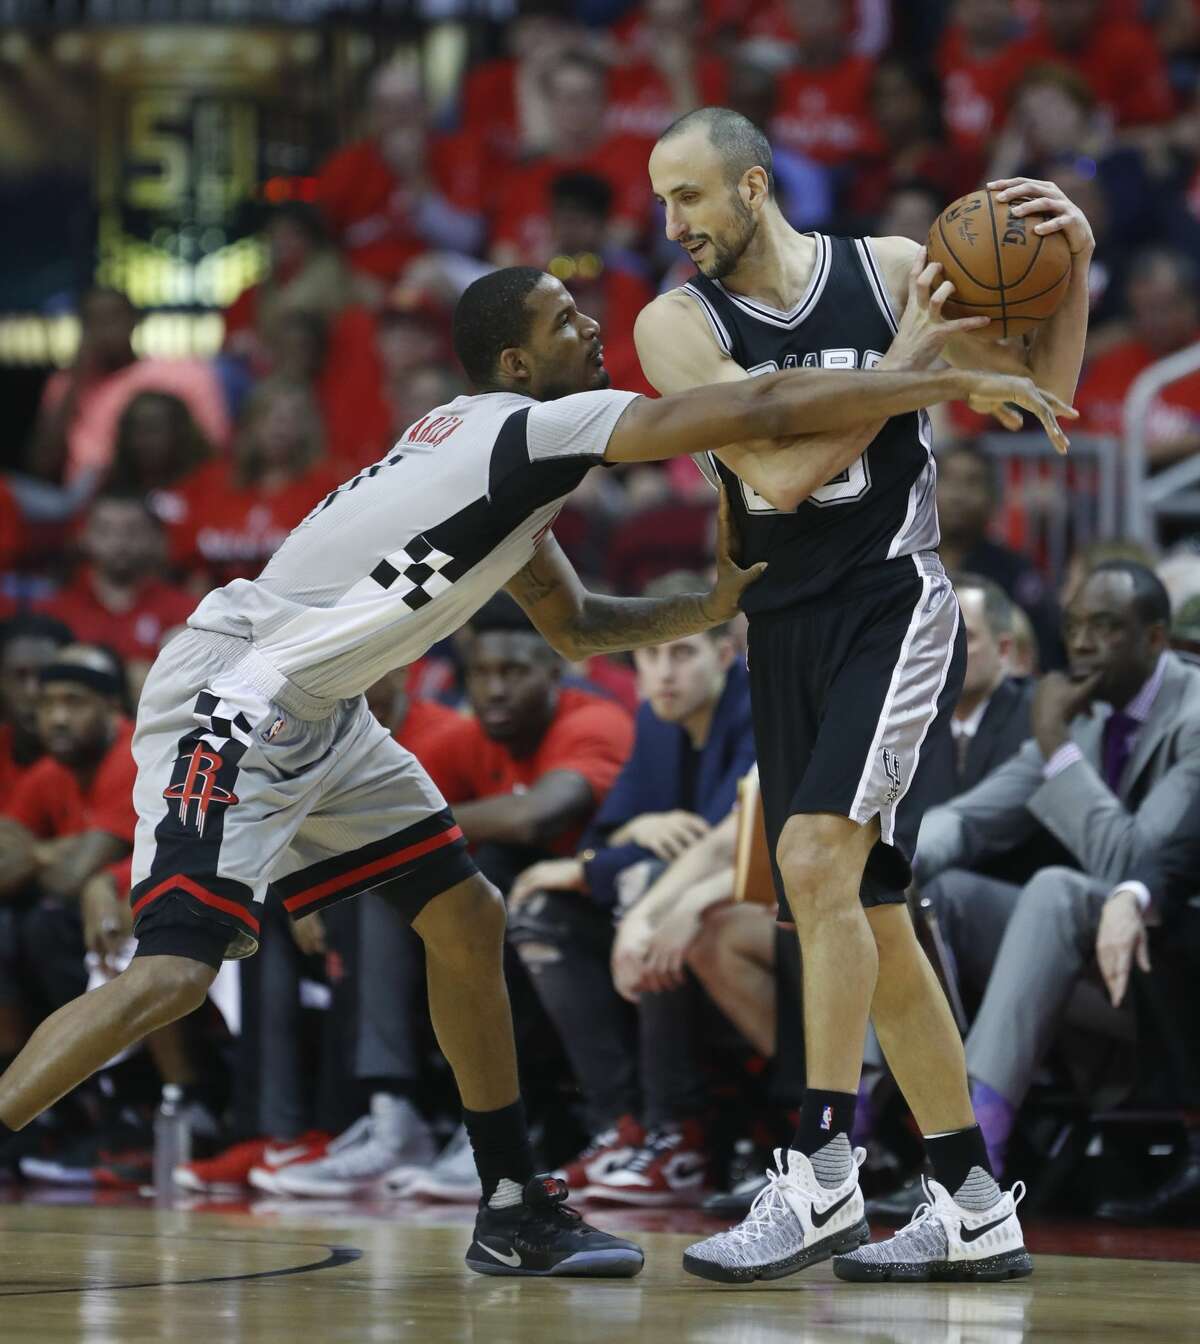 Houston Rockets forward Trevor Ariza (1) reaches for the ball held by San Antonio Spurs guard Manu Ginobili (20) during the first half of Game 6 of the second round of the Western Conference NBA playoffs at the Toyota Center, Thursday, May 11, 2017, in Houston. ( Karen Warren / Houston Chronicle )